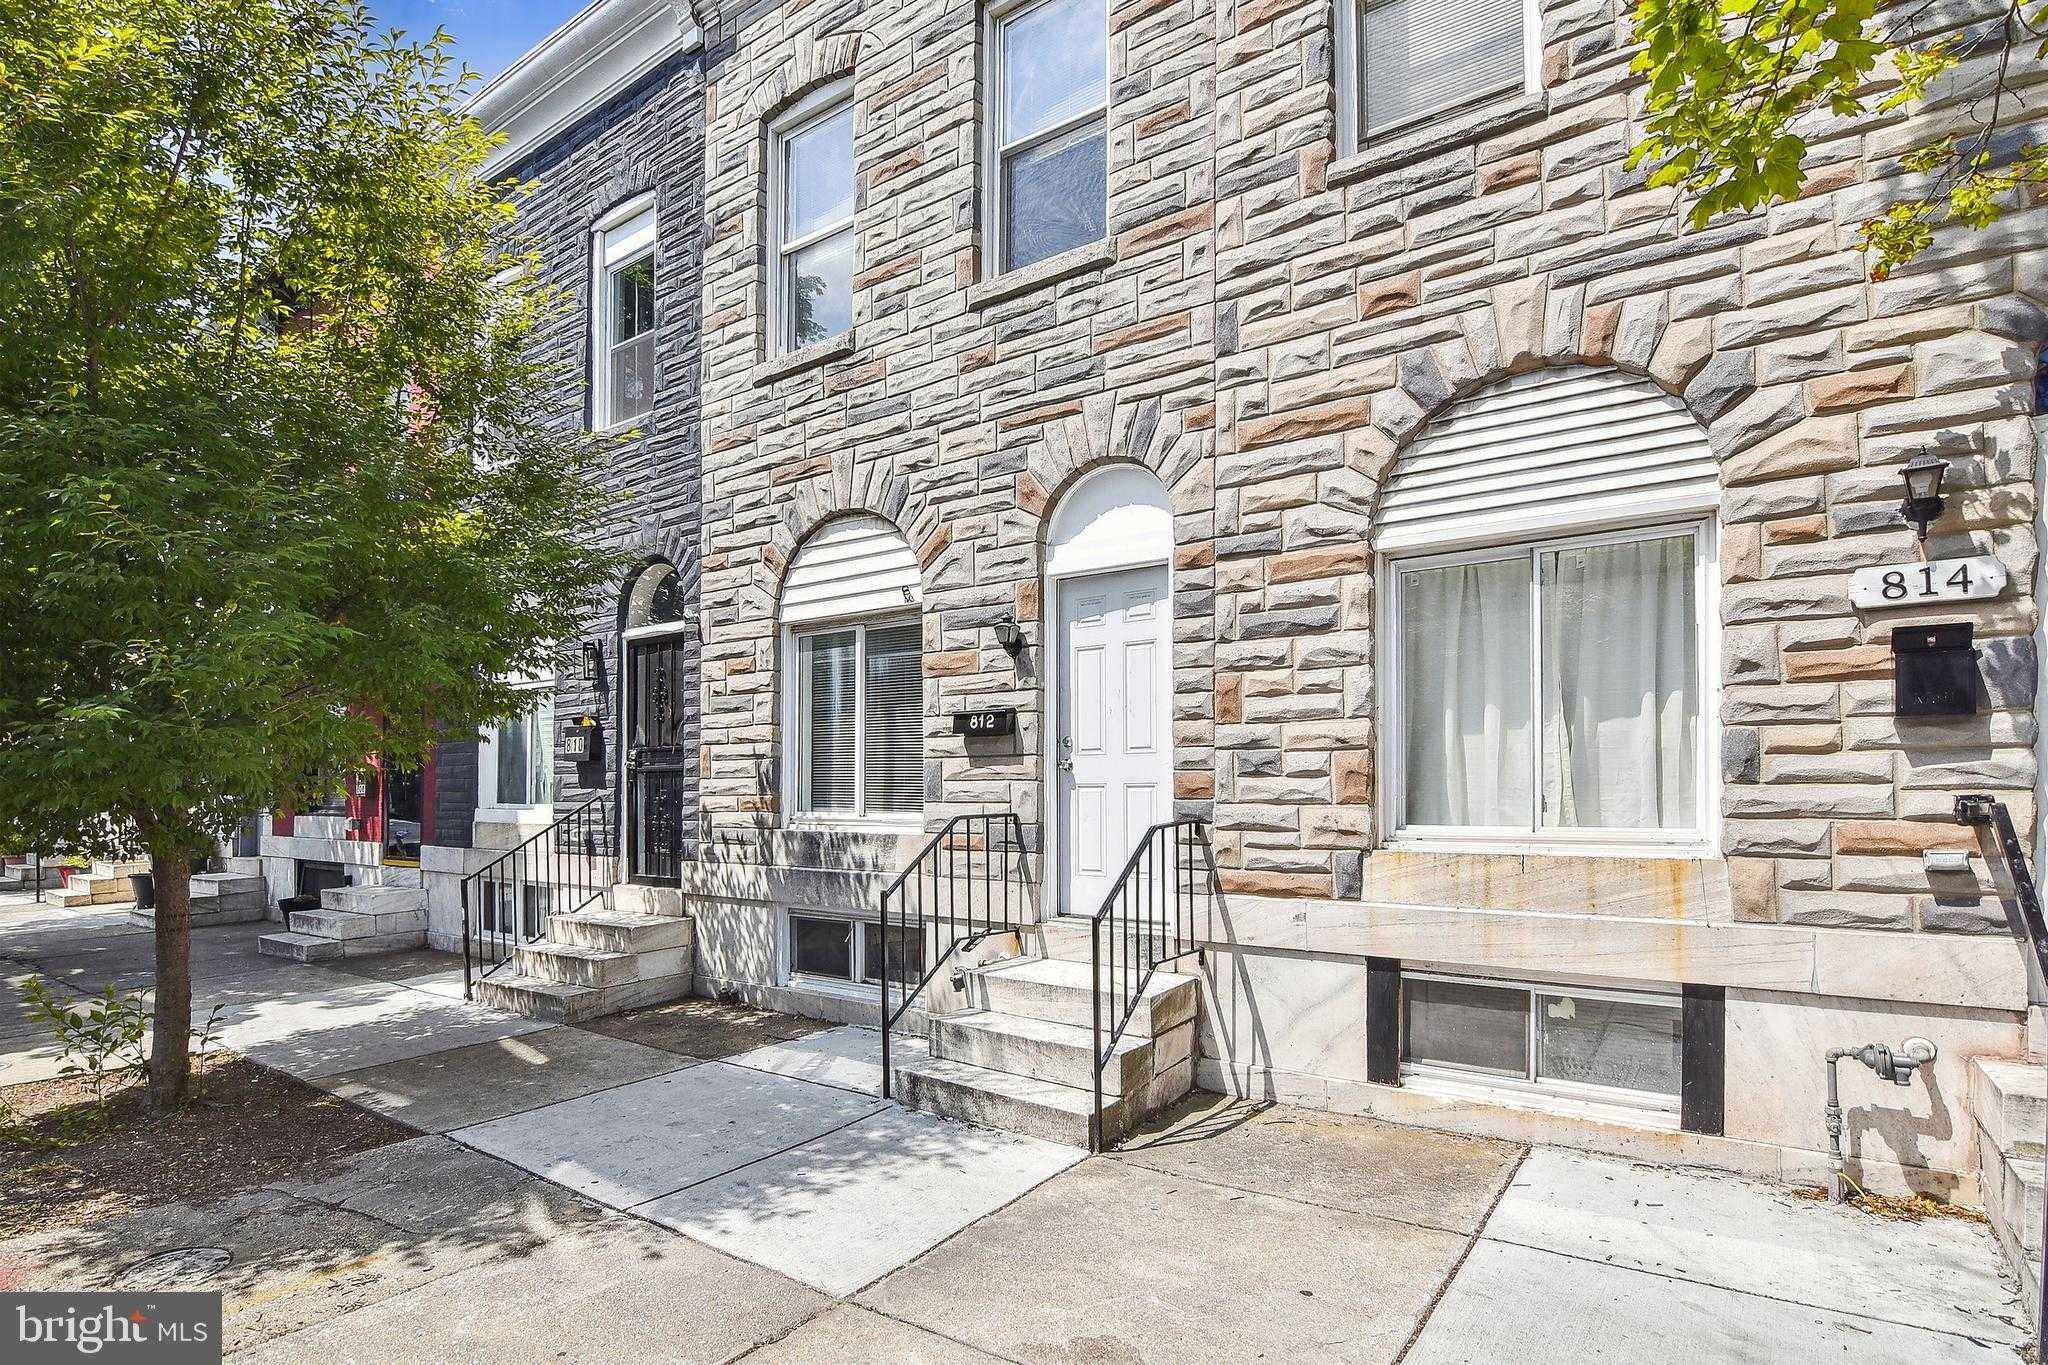 View BALTIMORE, MD 21205 townhome